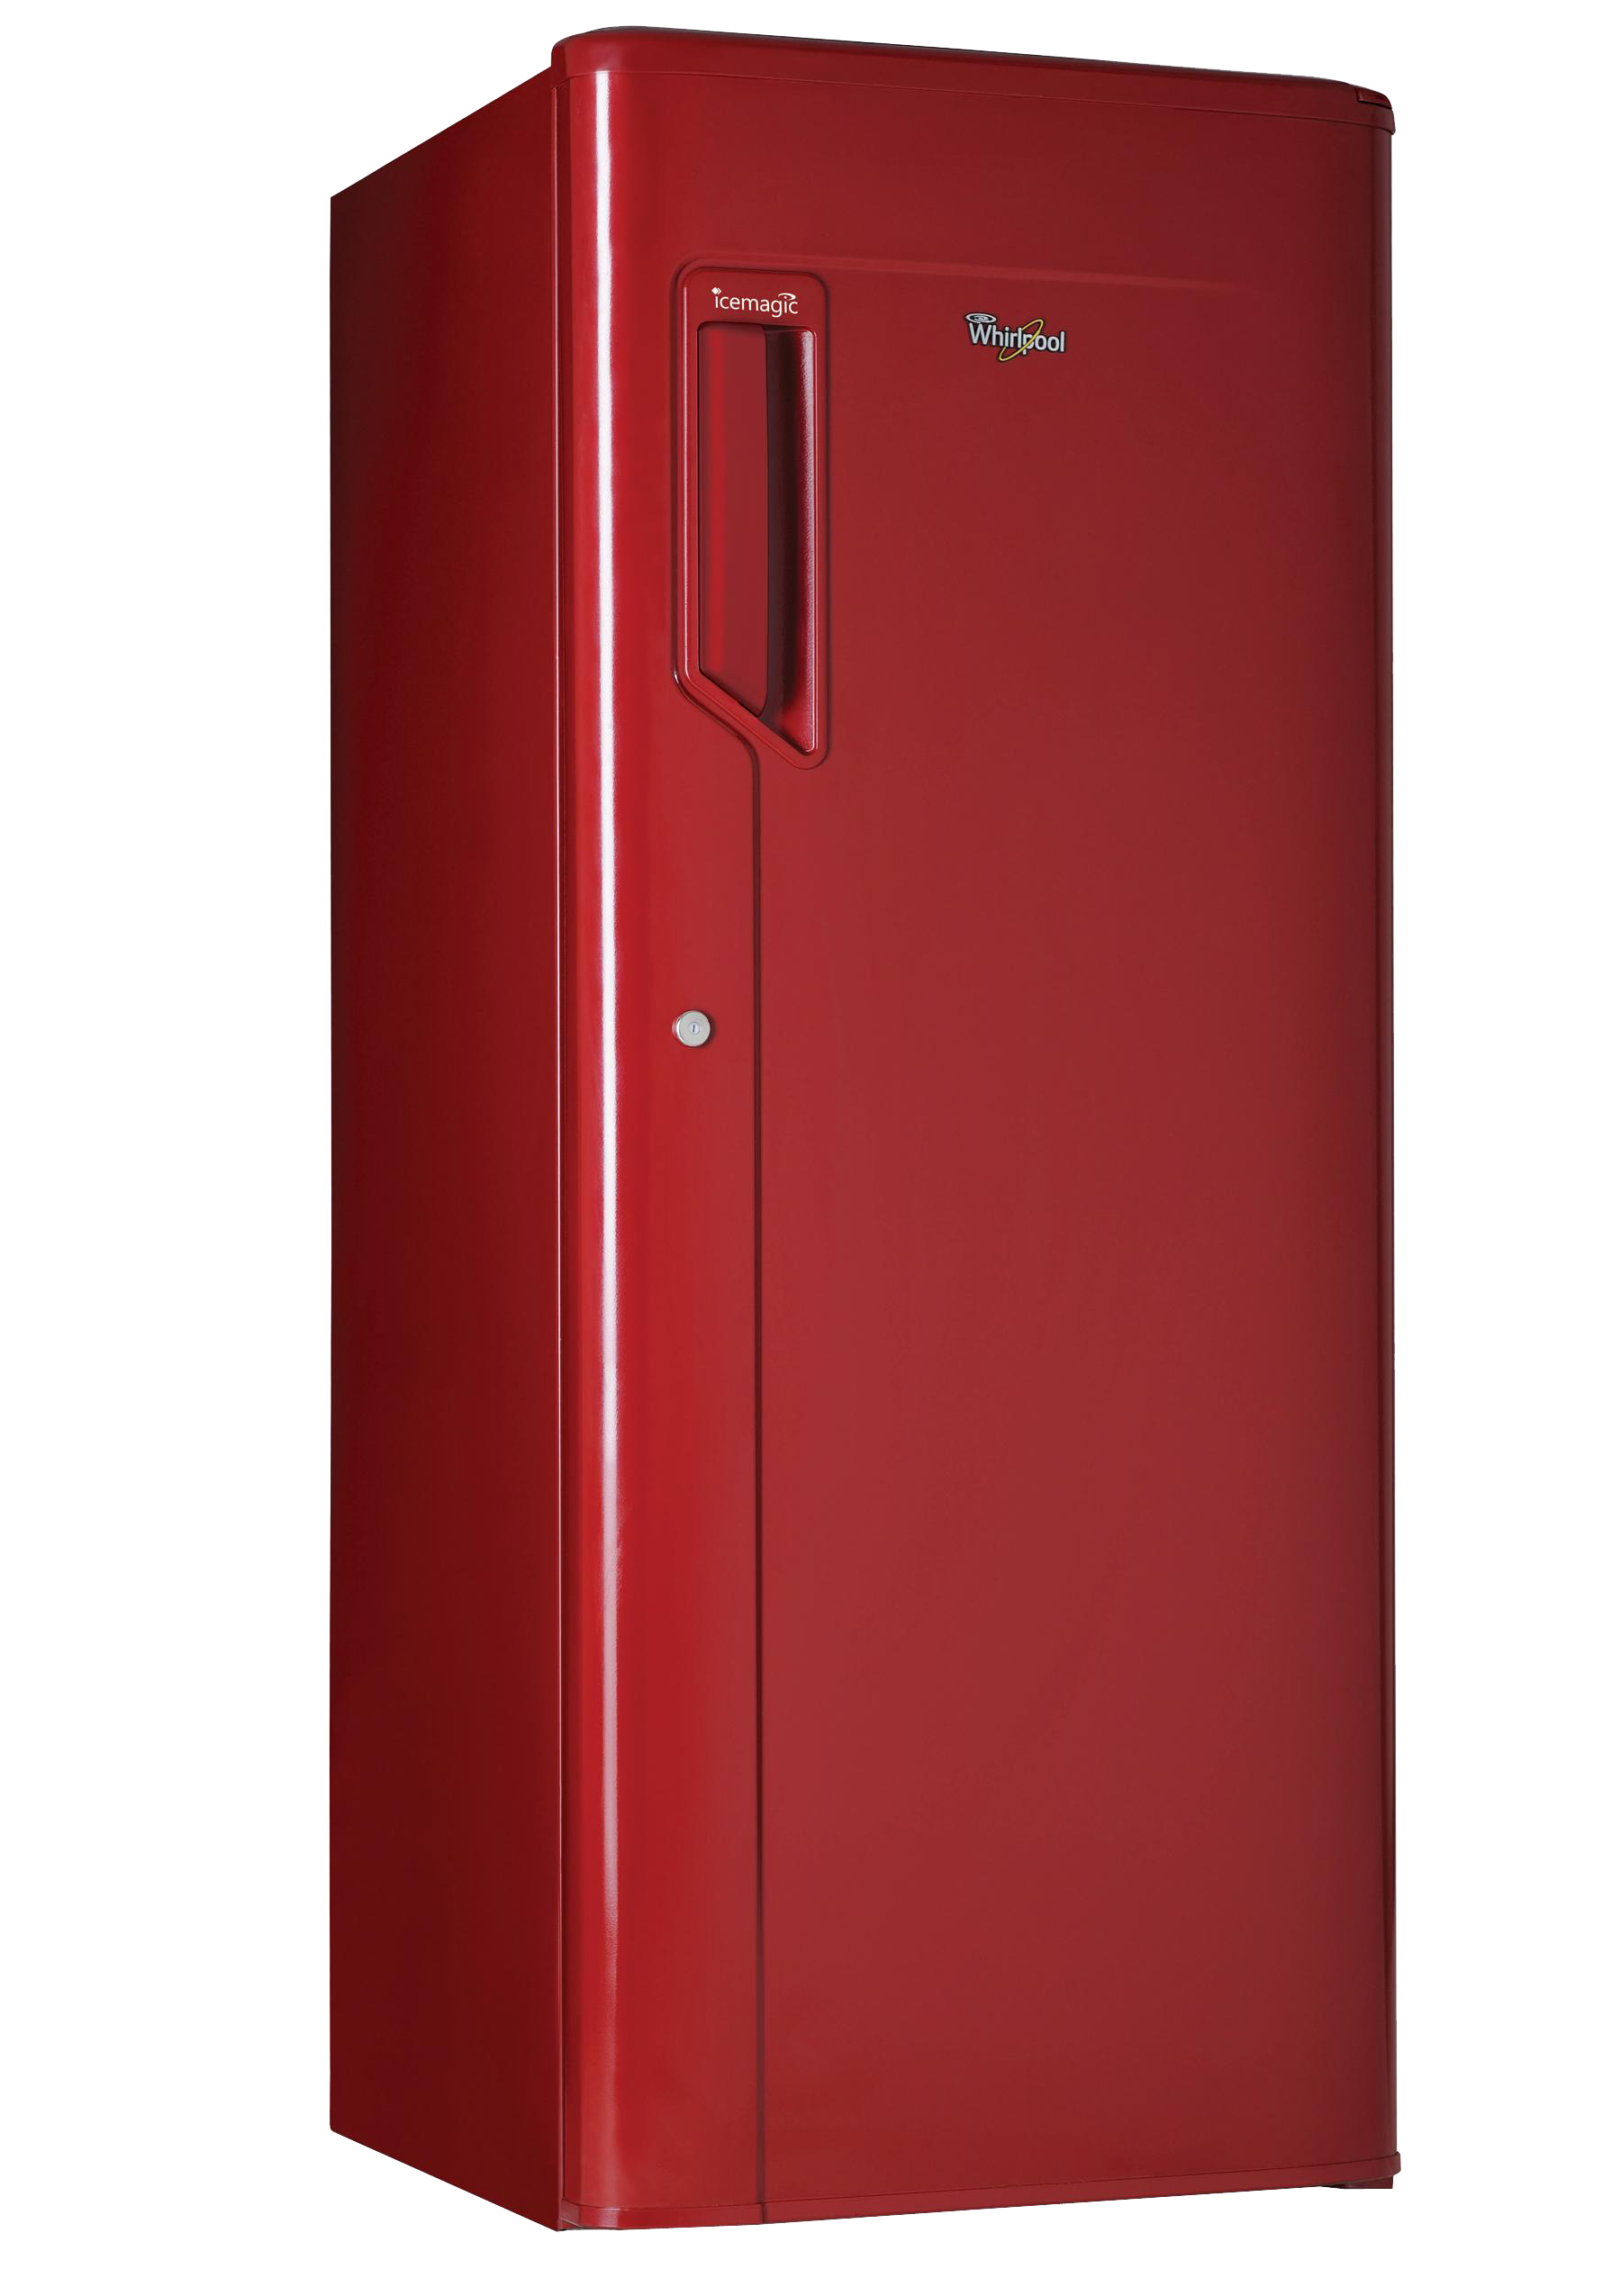 Refrigerator Picture PNG Image